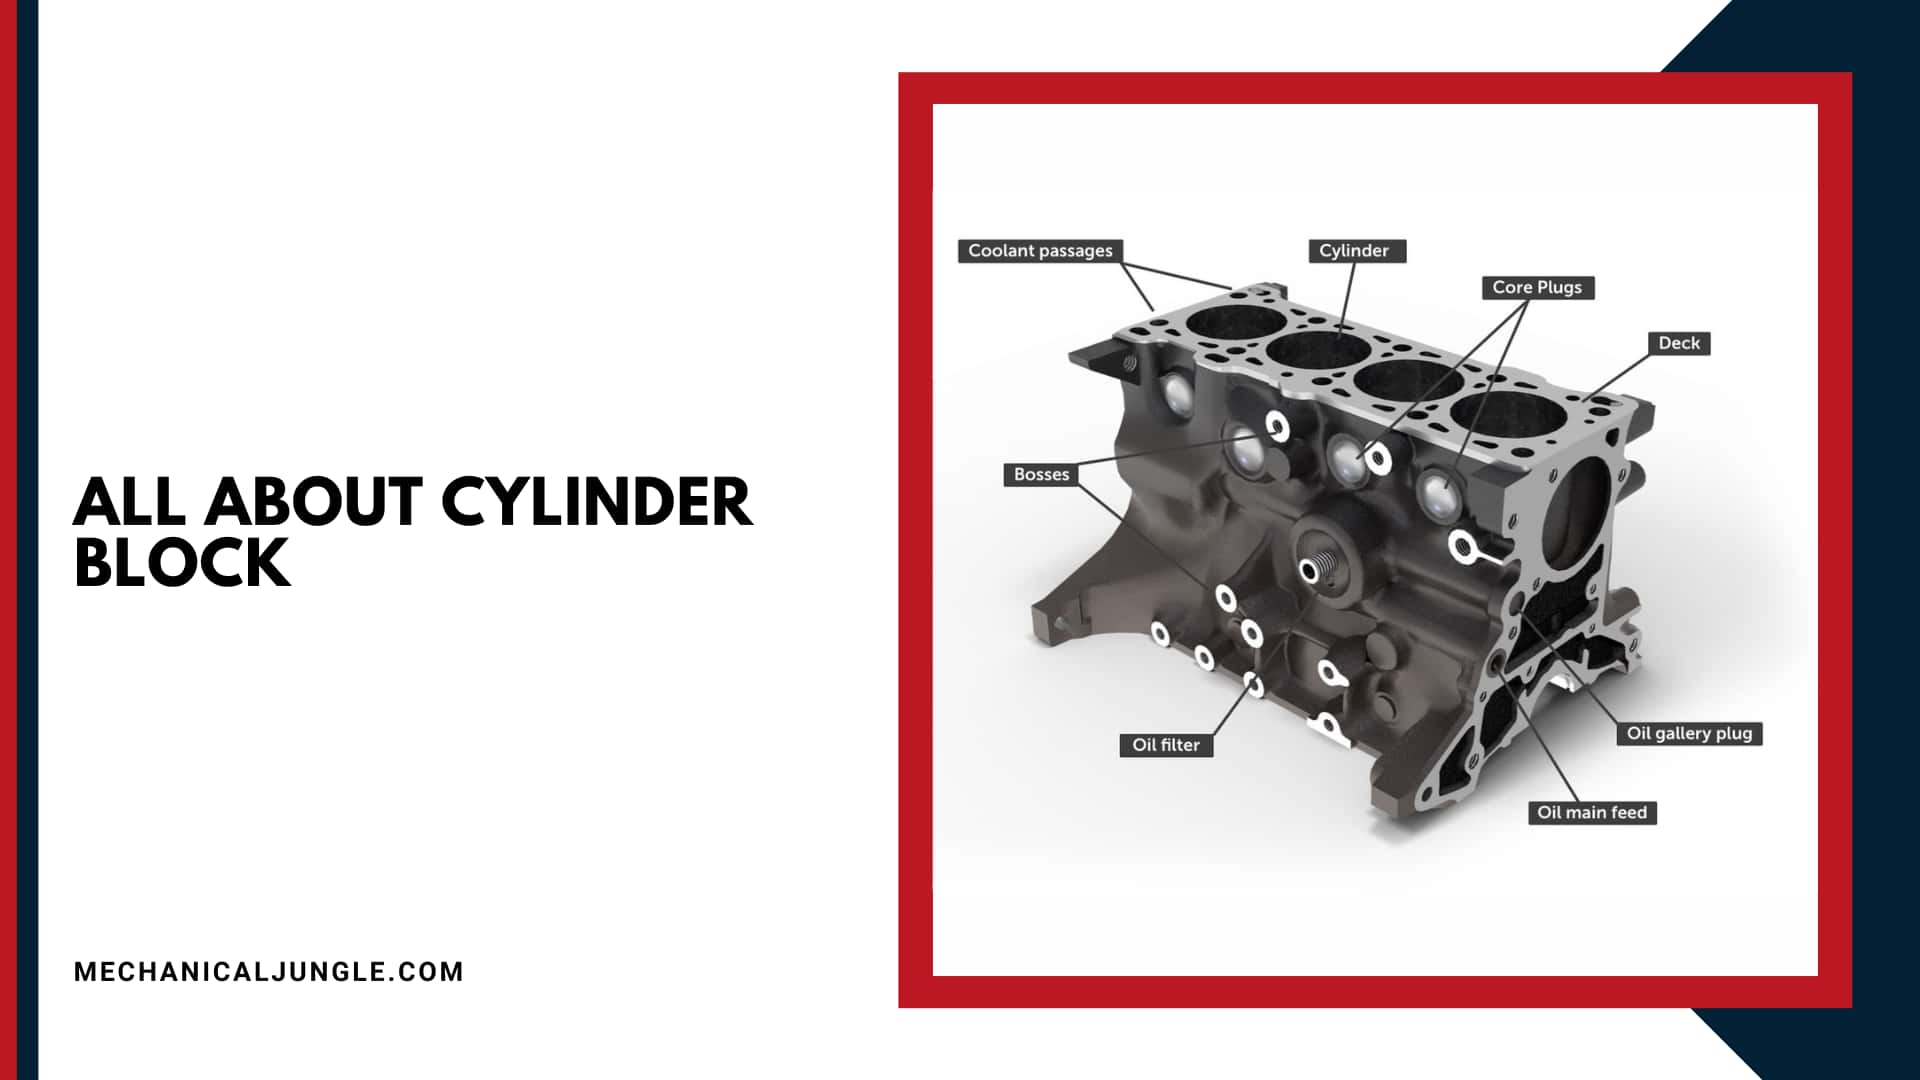 All About Cylinder Block